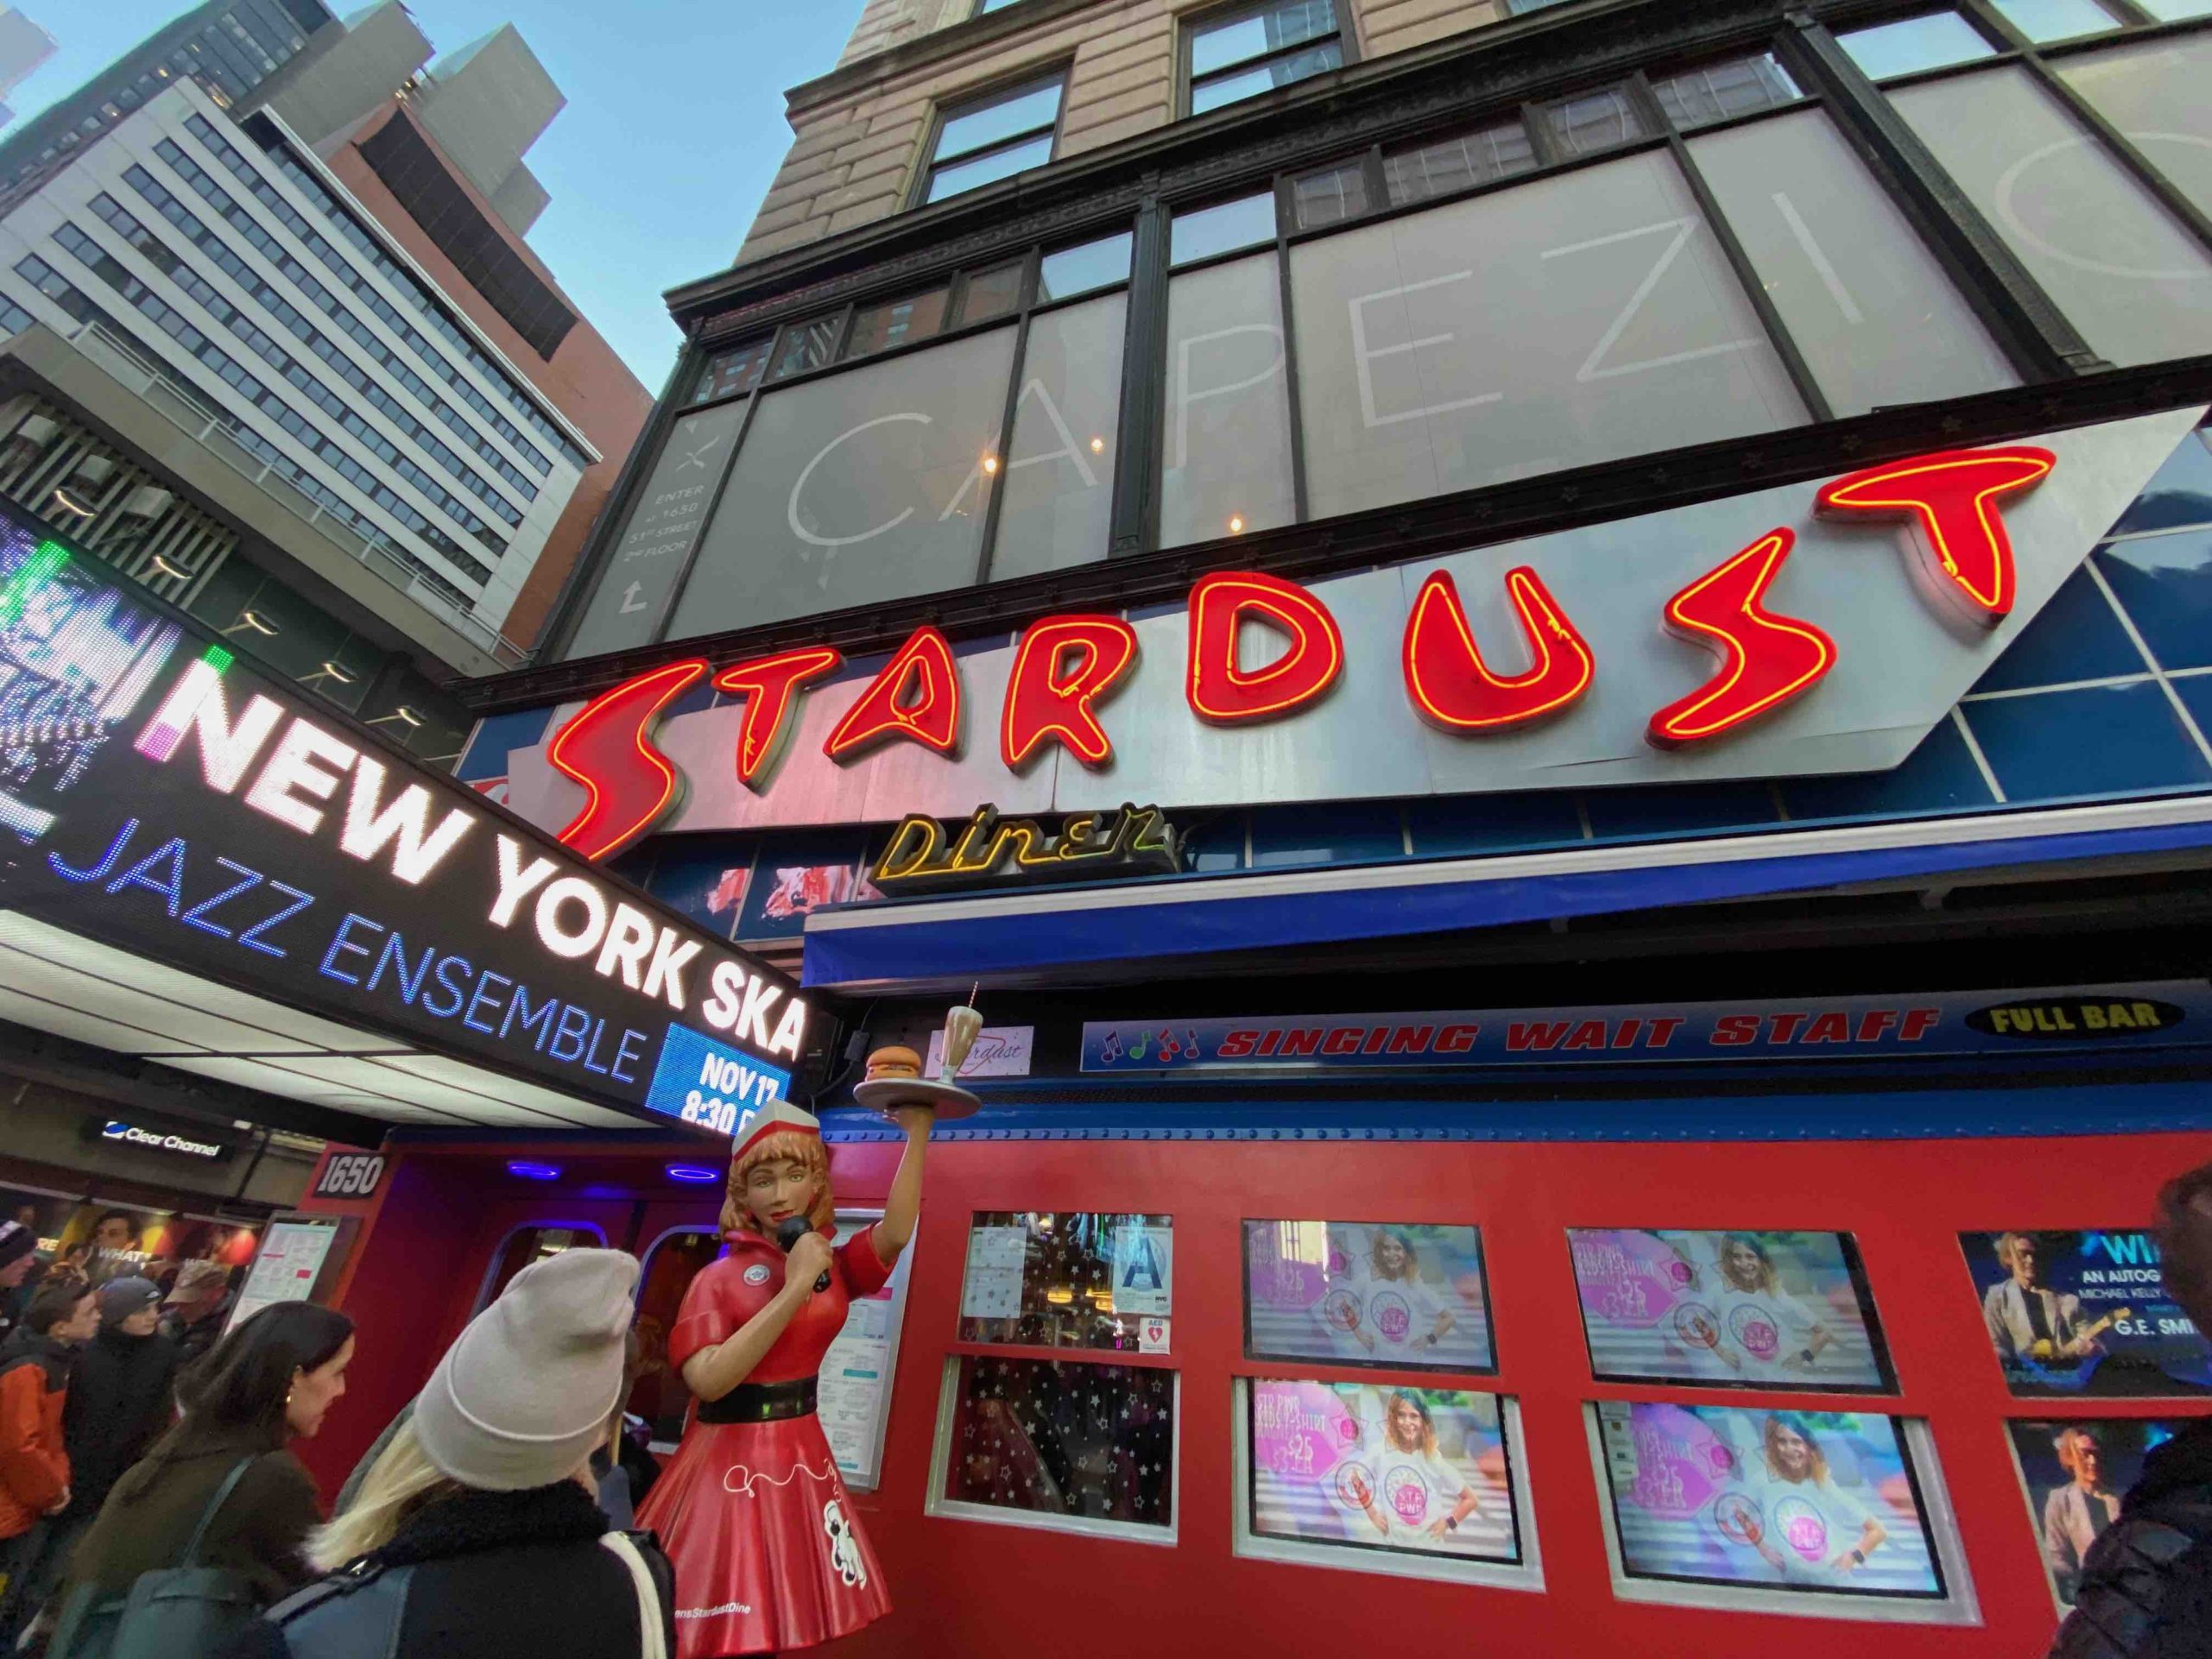 where to eat thanksgiving dinner in new york city? Ellen’s Stardust Diner in Times Square